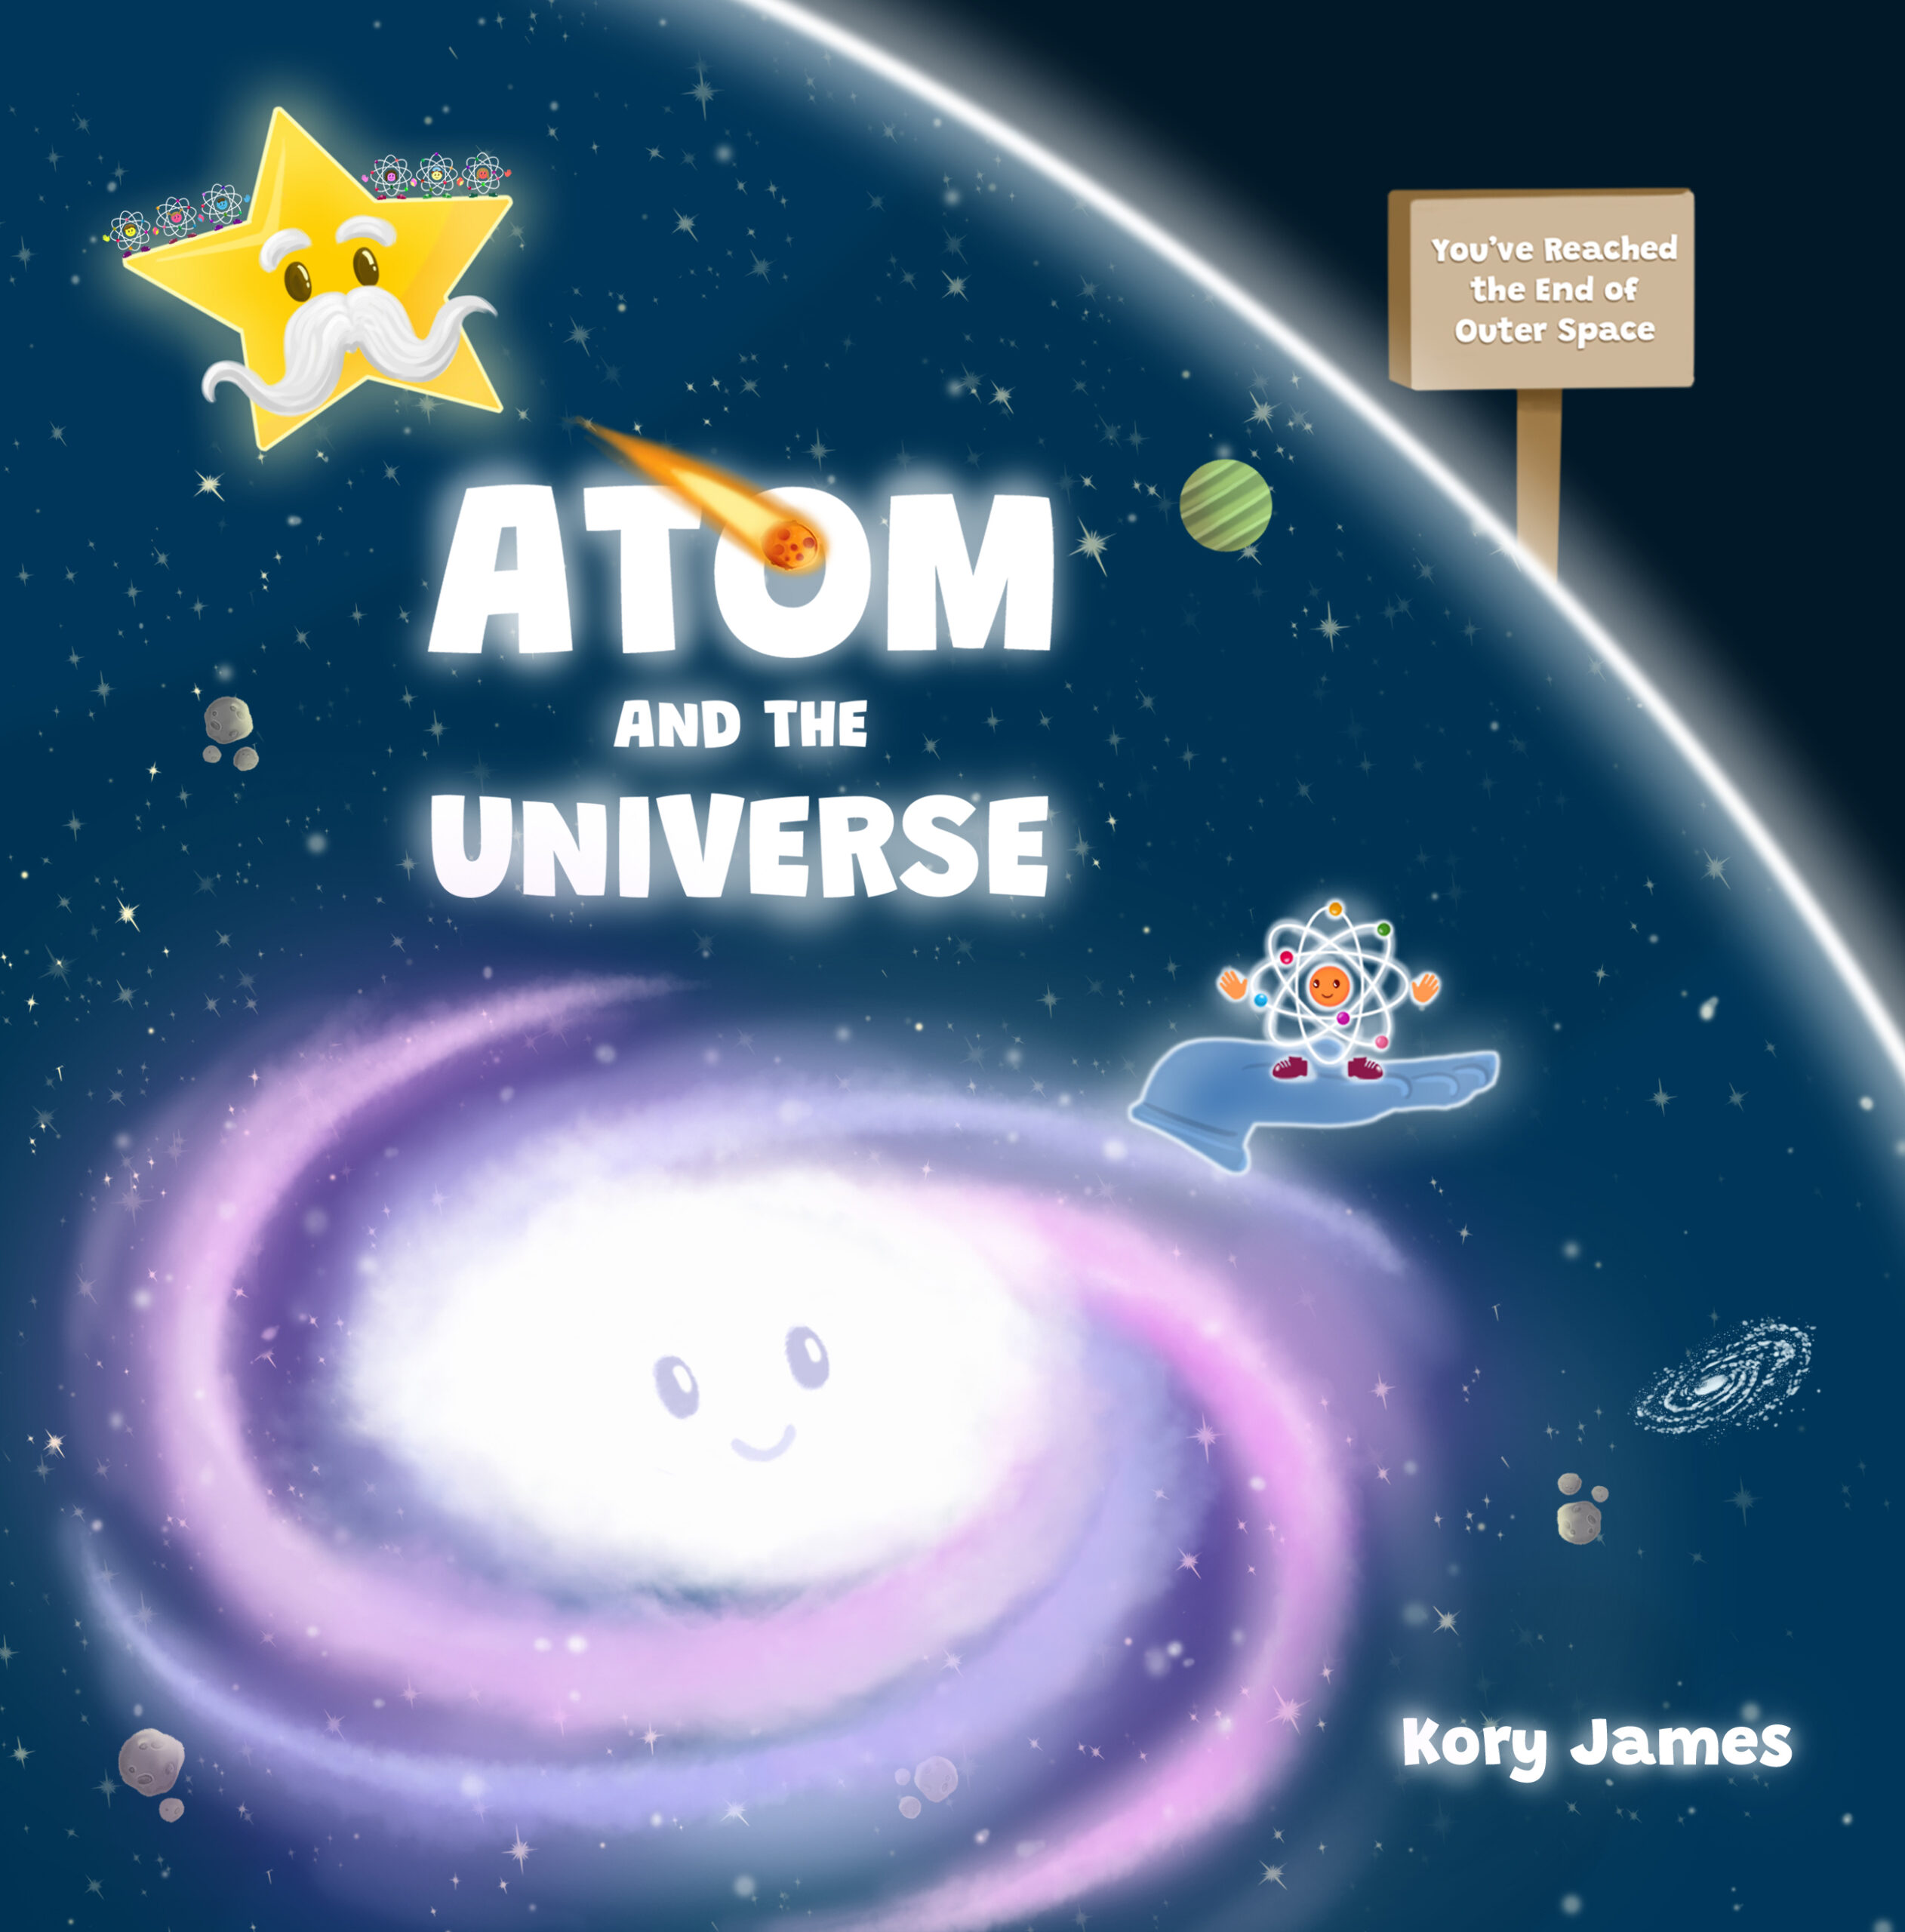 FREE: Atom and the Universe by Kory James